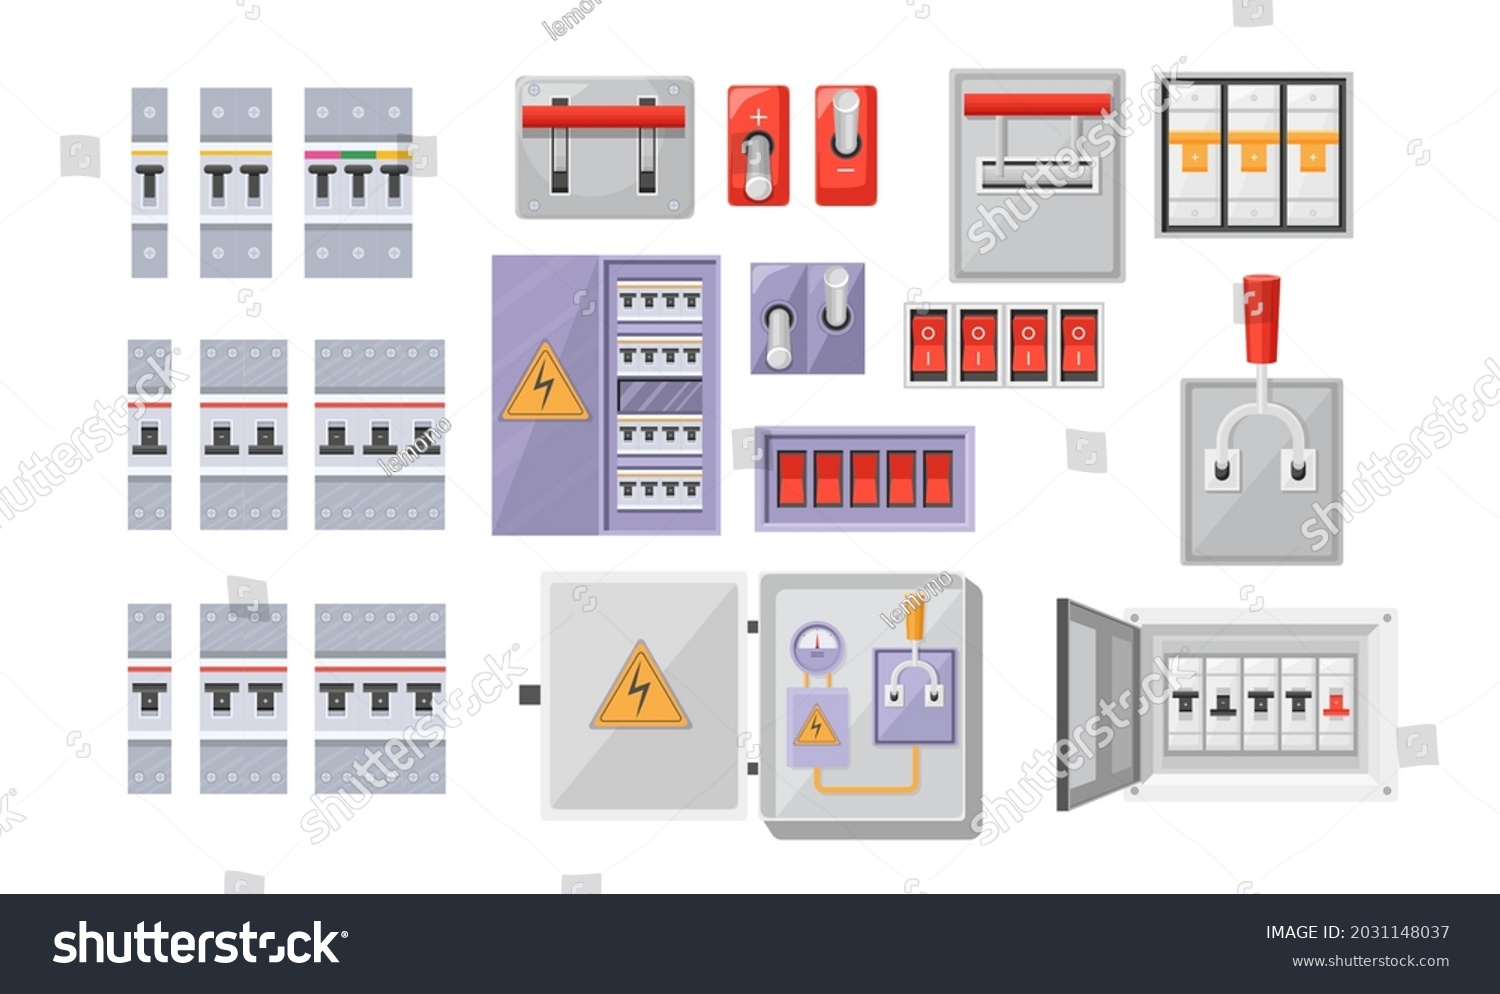 SVG of Set Electric Breaker Switchbox Electricity and Energy Equipment Red Buttons, Contact-breaker Isolated on White Background. Power Control, Switchboard Panel with Turners. Cartoon Vector Illustration svg